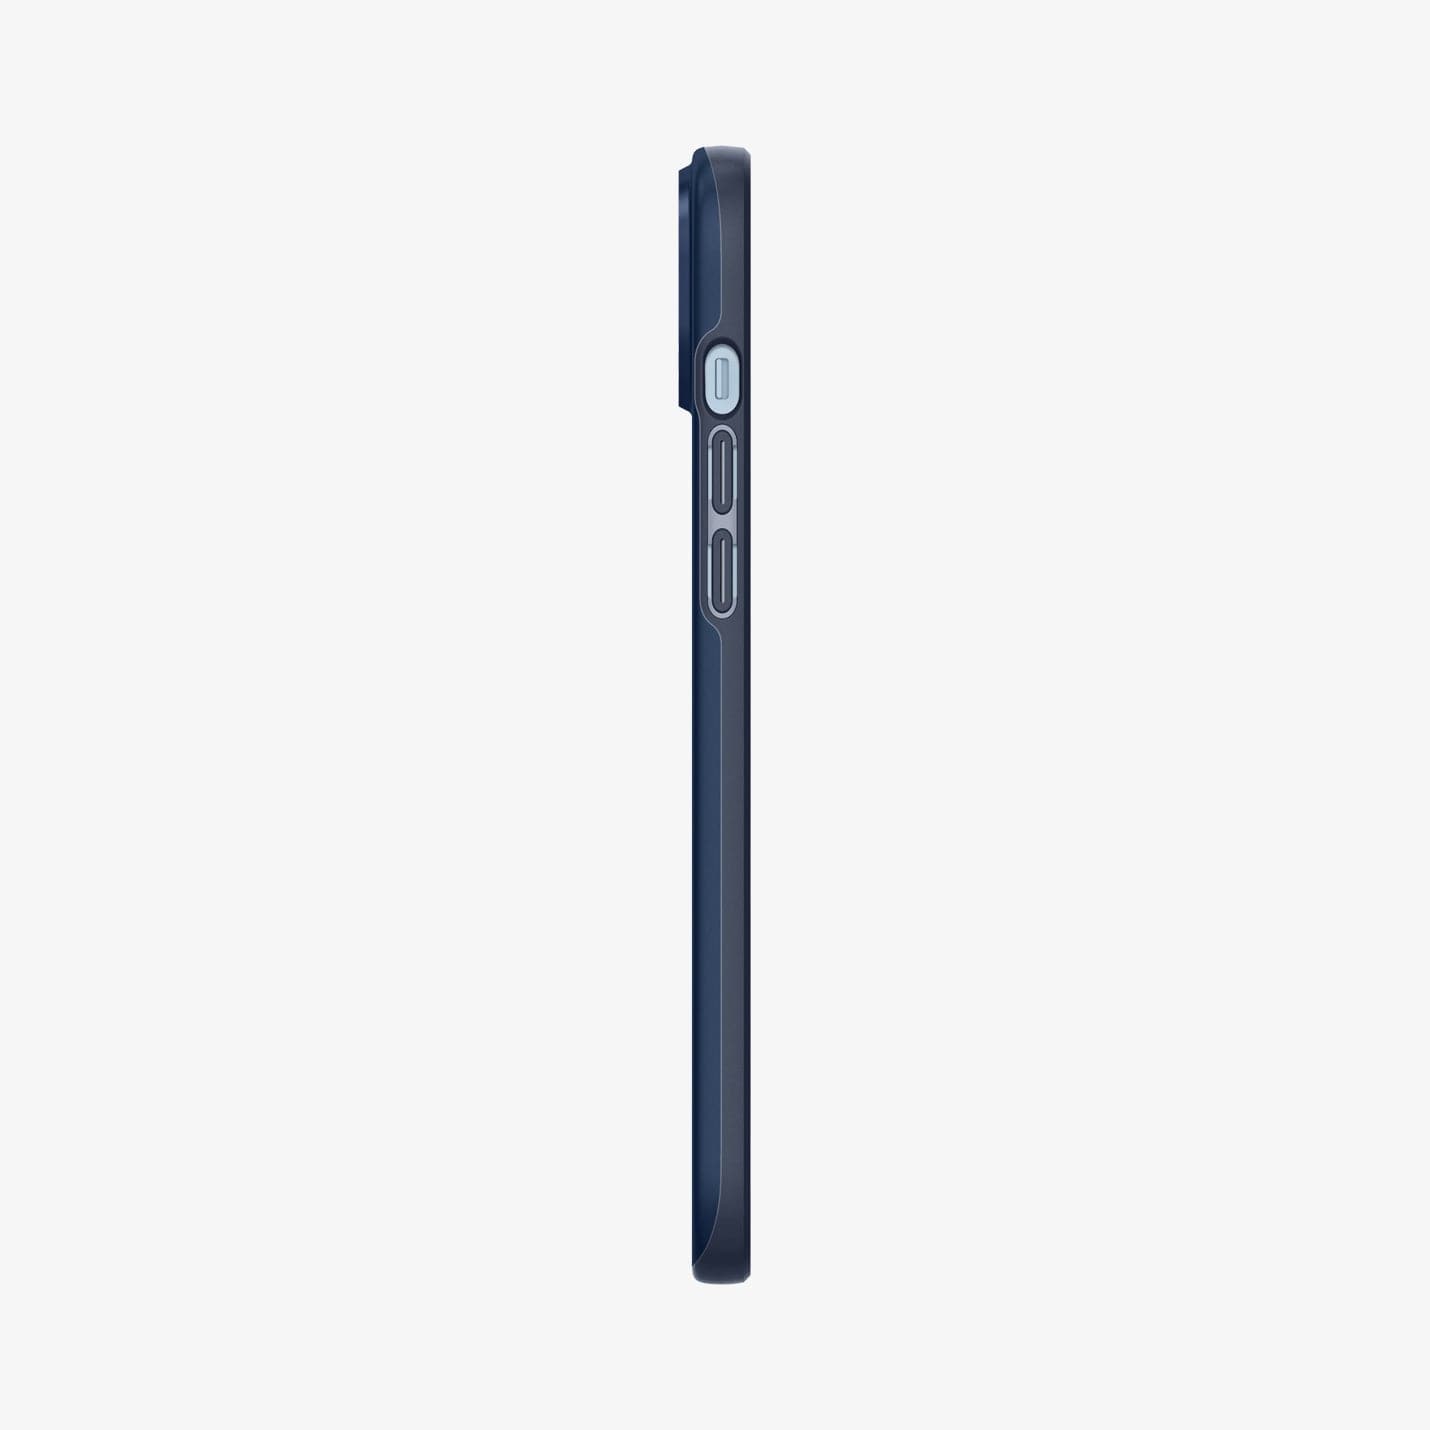 ACS04775 - iPhone 14 Plus Case Thin Fit in navy blue showing the side with volume controls